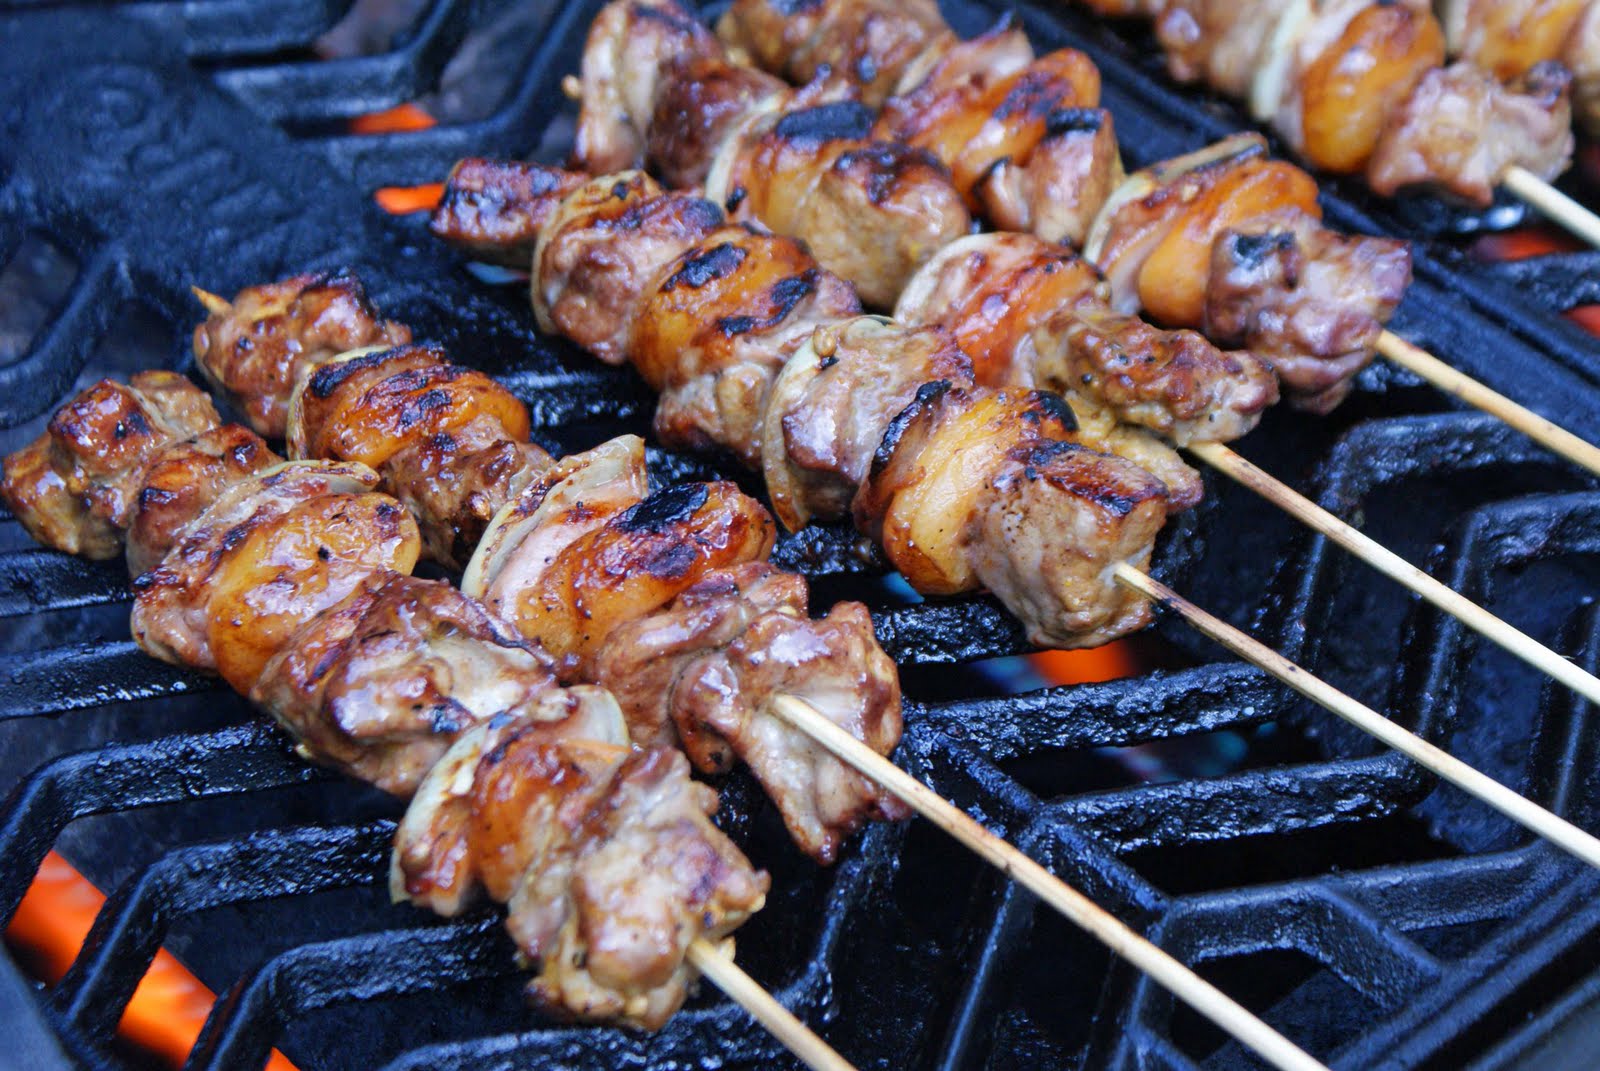 Kabobs+on+the+grill.jpg